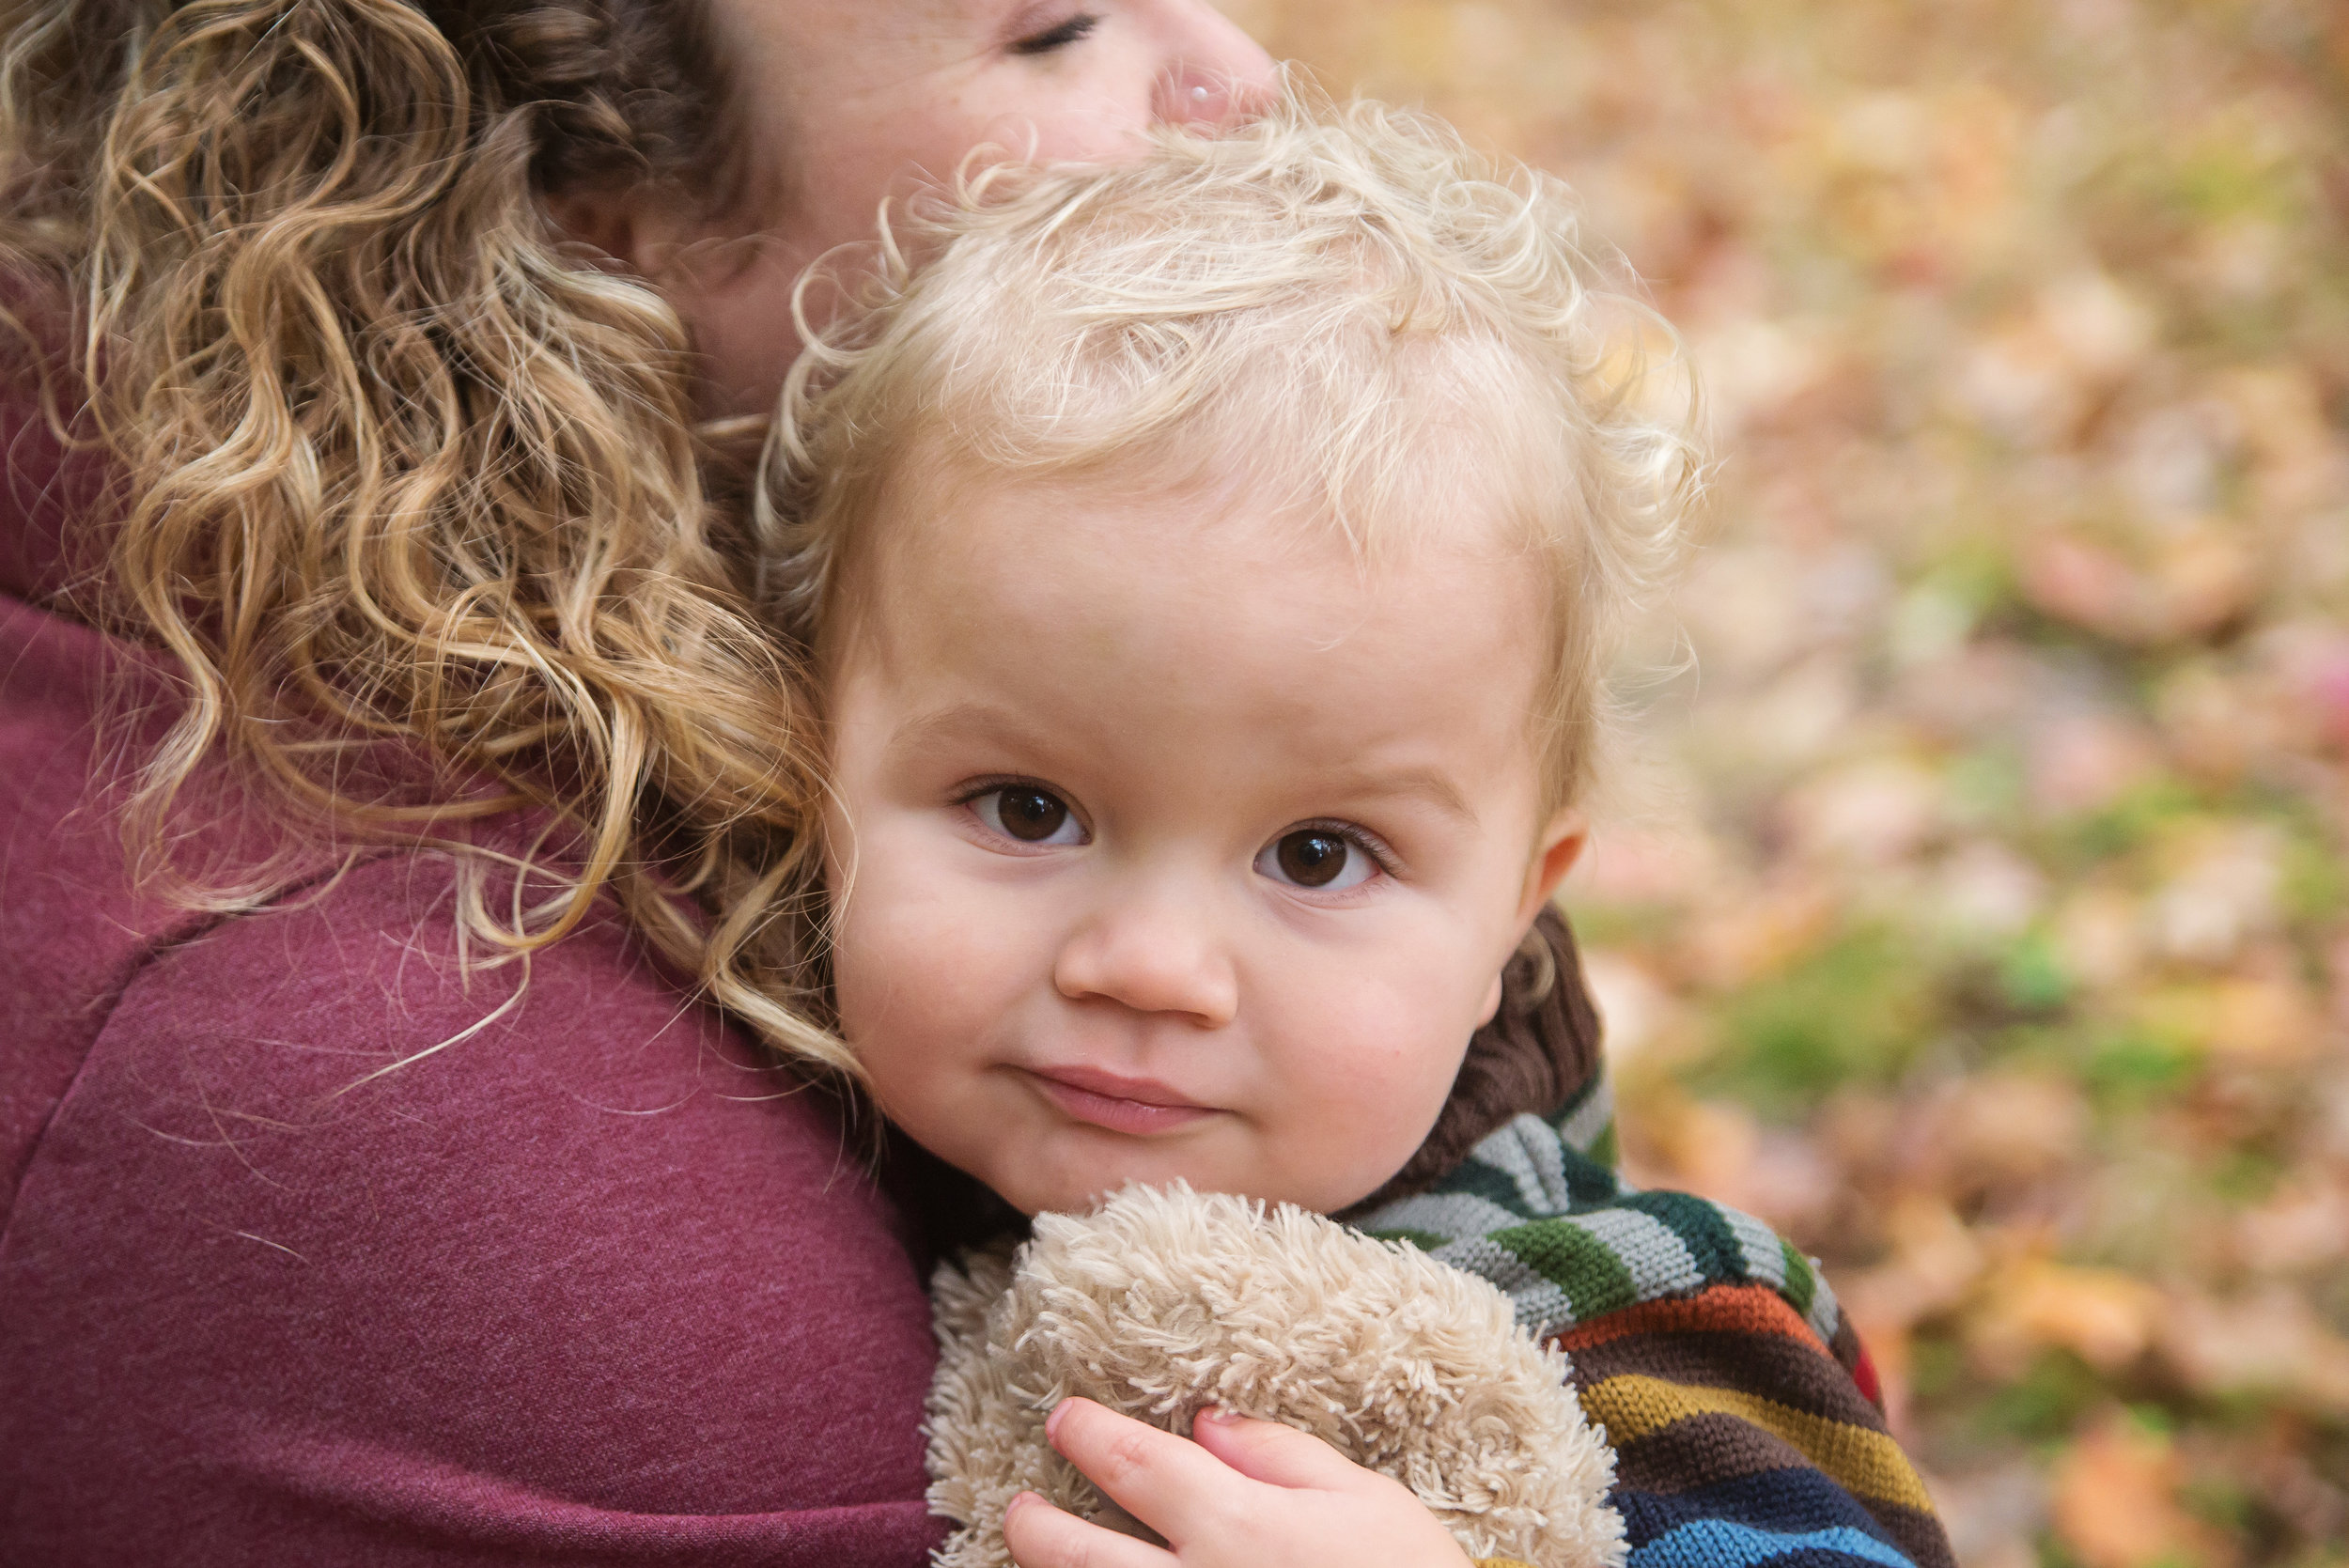 st-louis-fall-mini-sessions-2018-family-photographer-boy-on-moms-shoulder-leaves-in-the-background.jpg